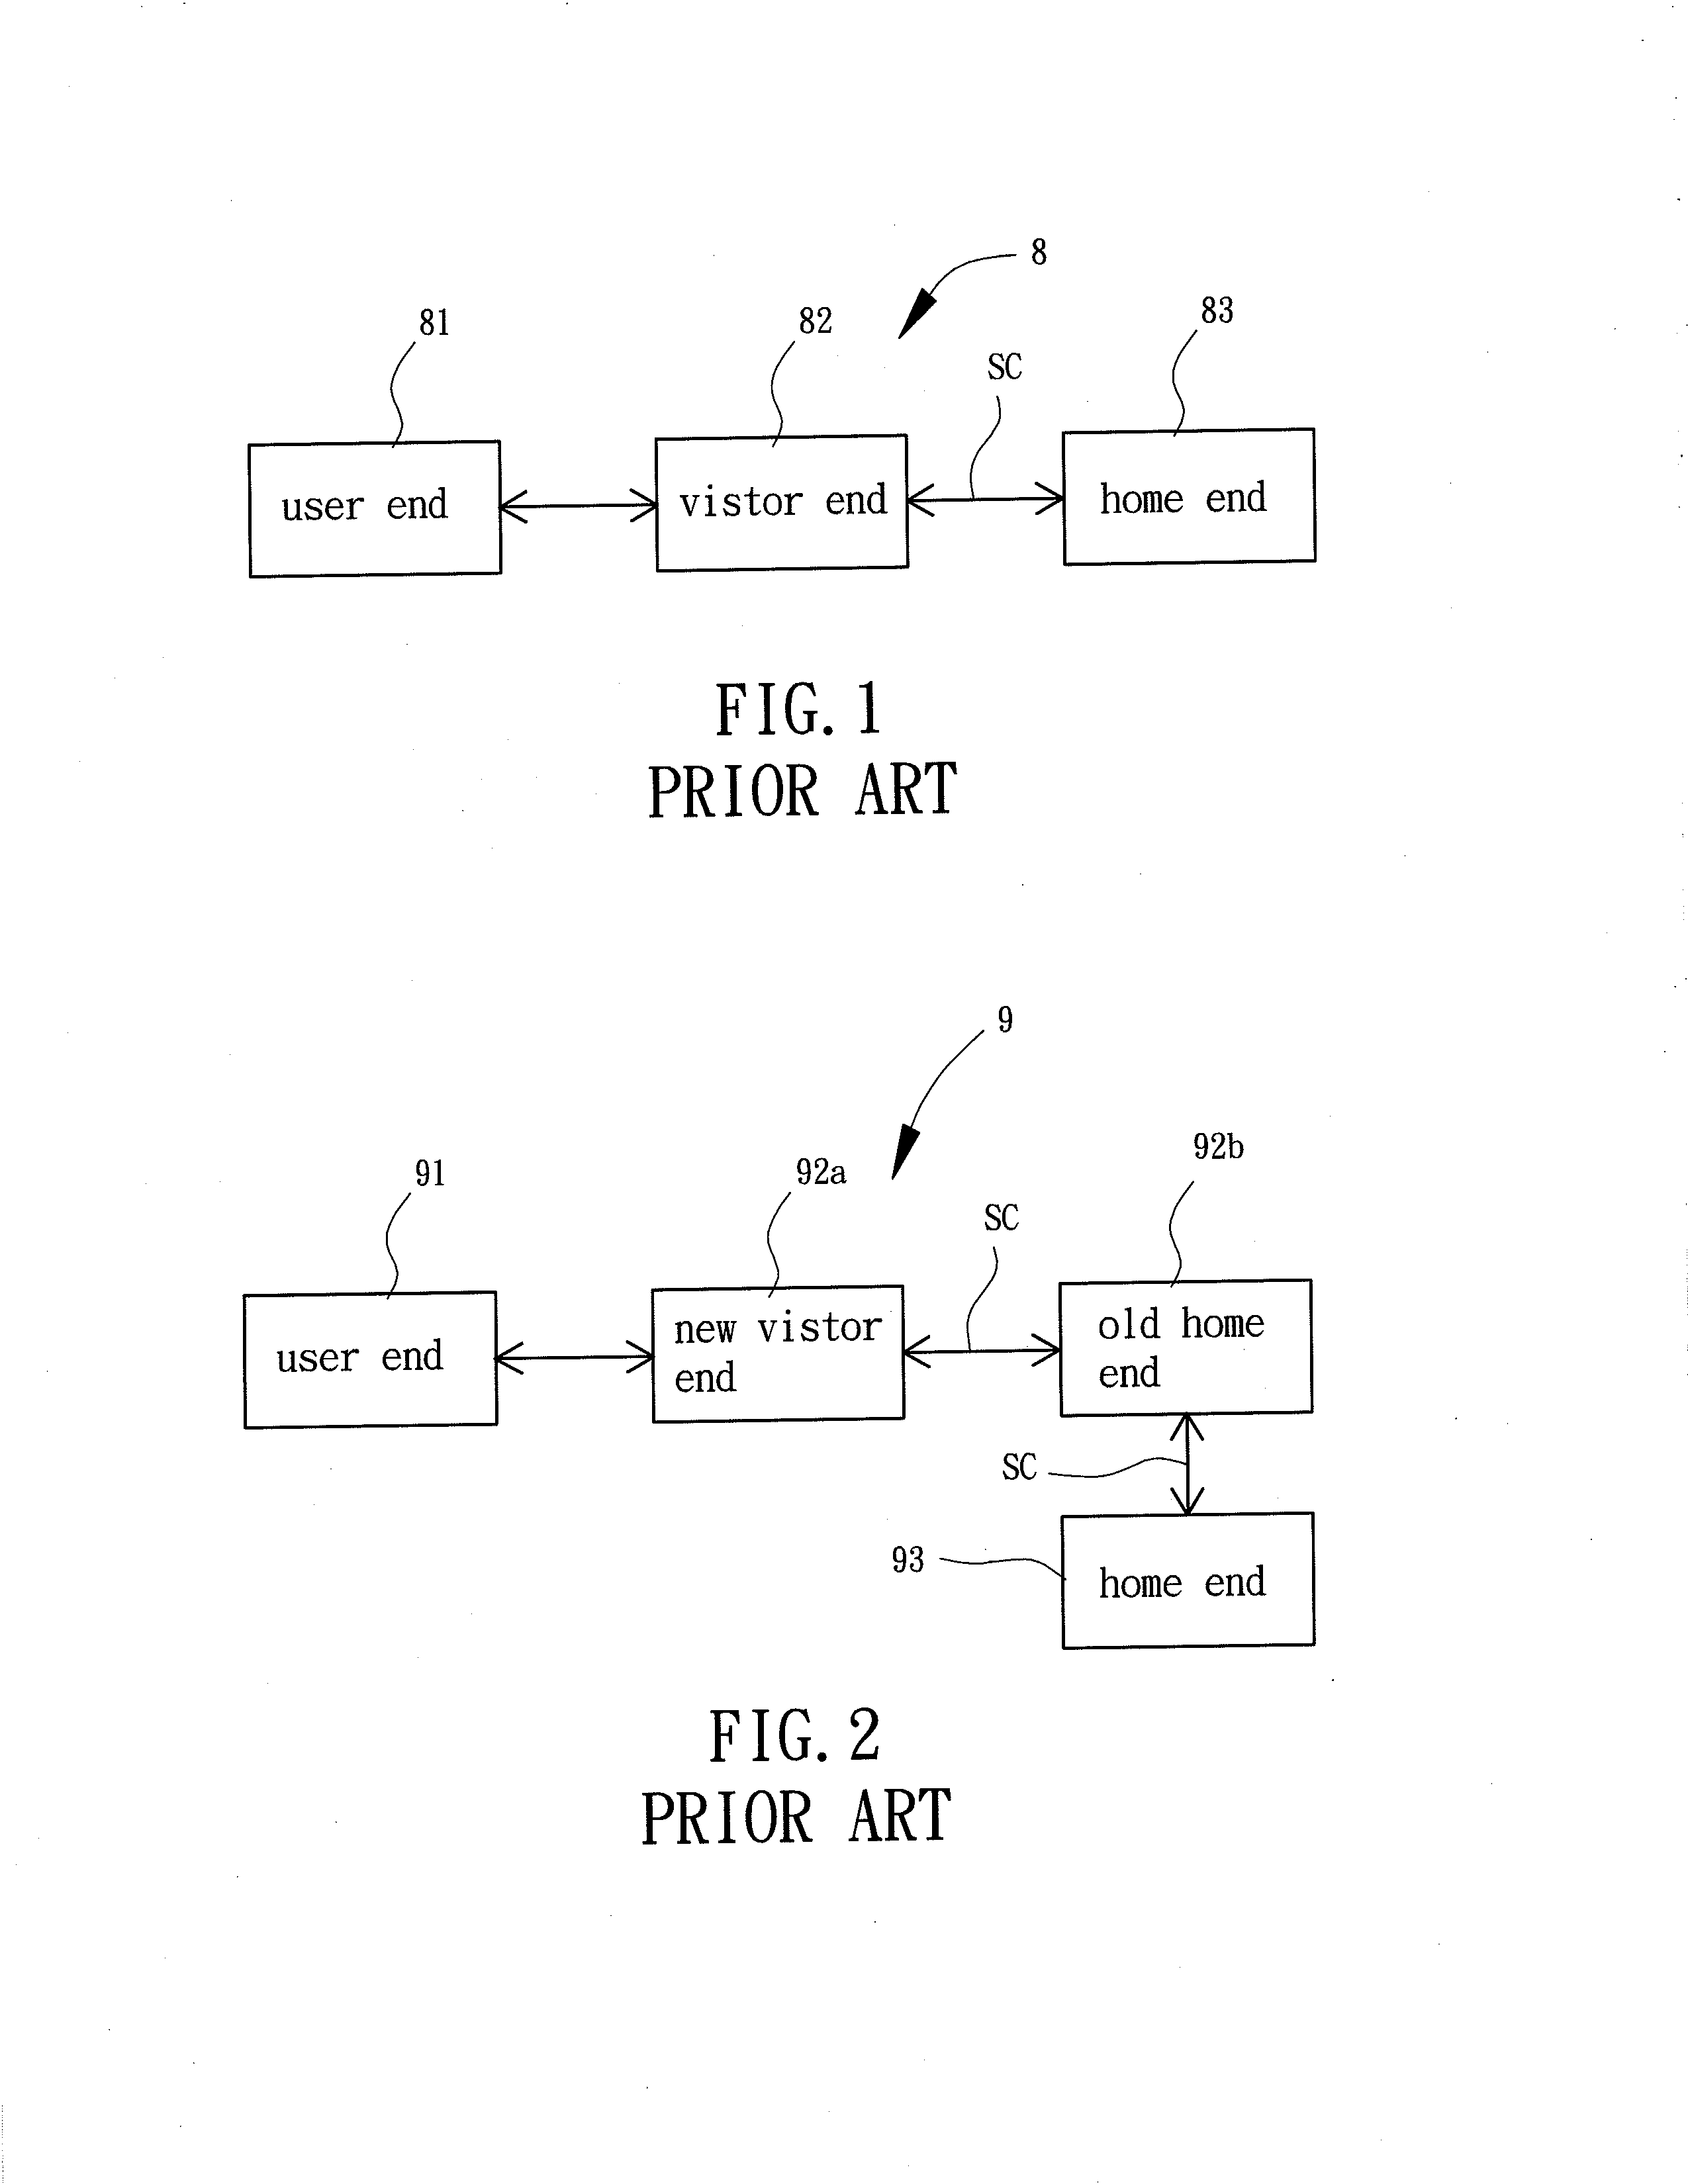 Roaming authentication method for a GSM system